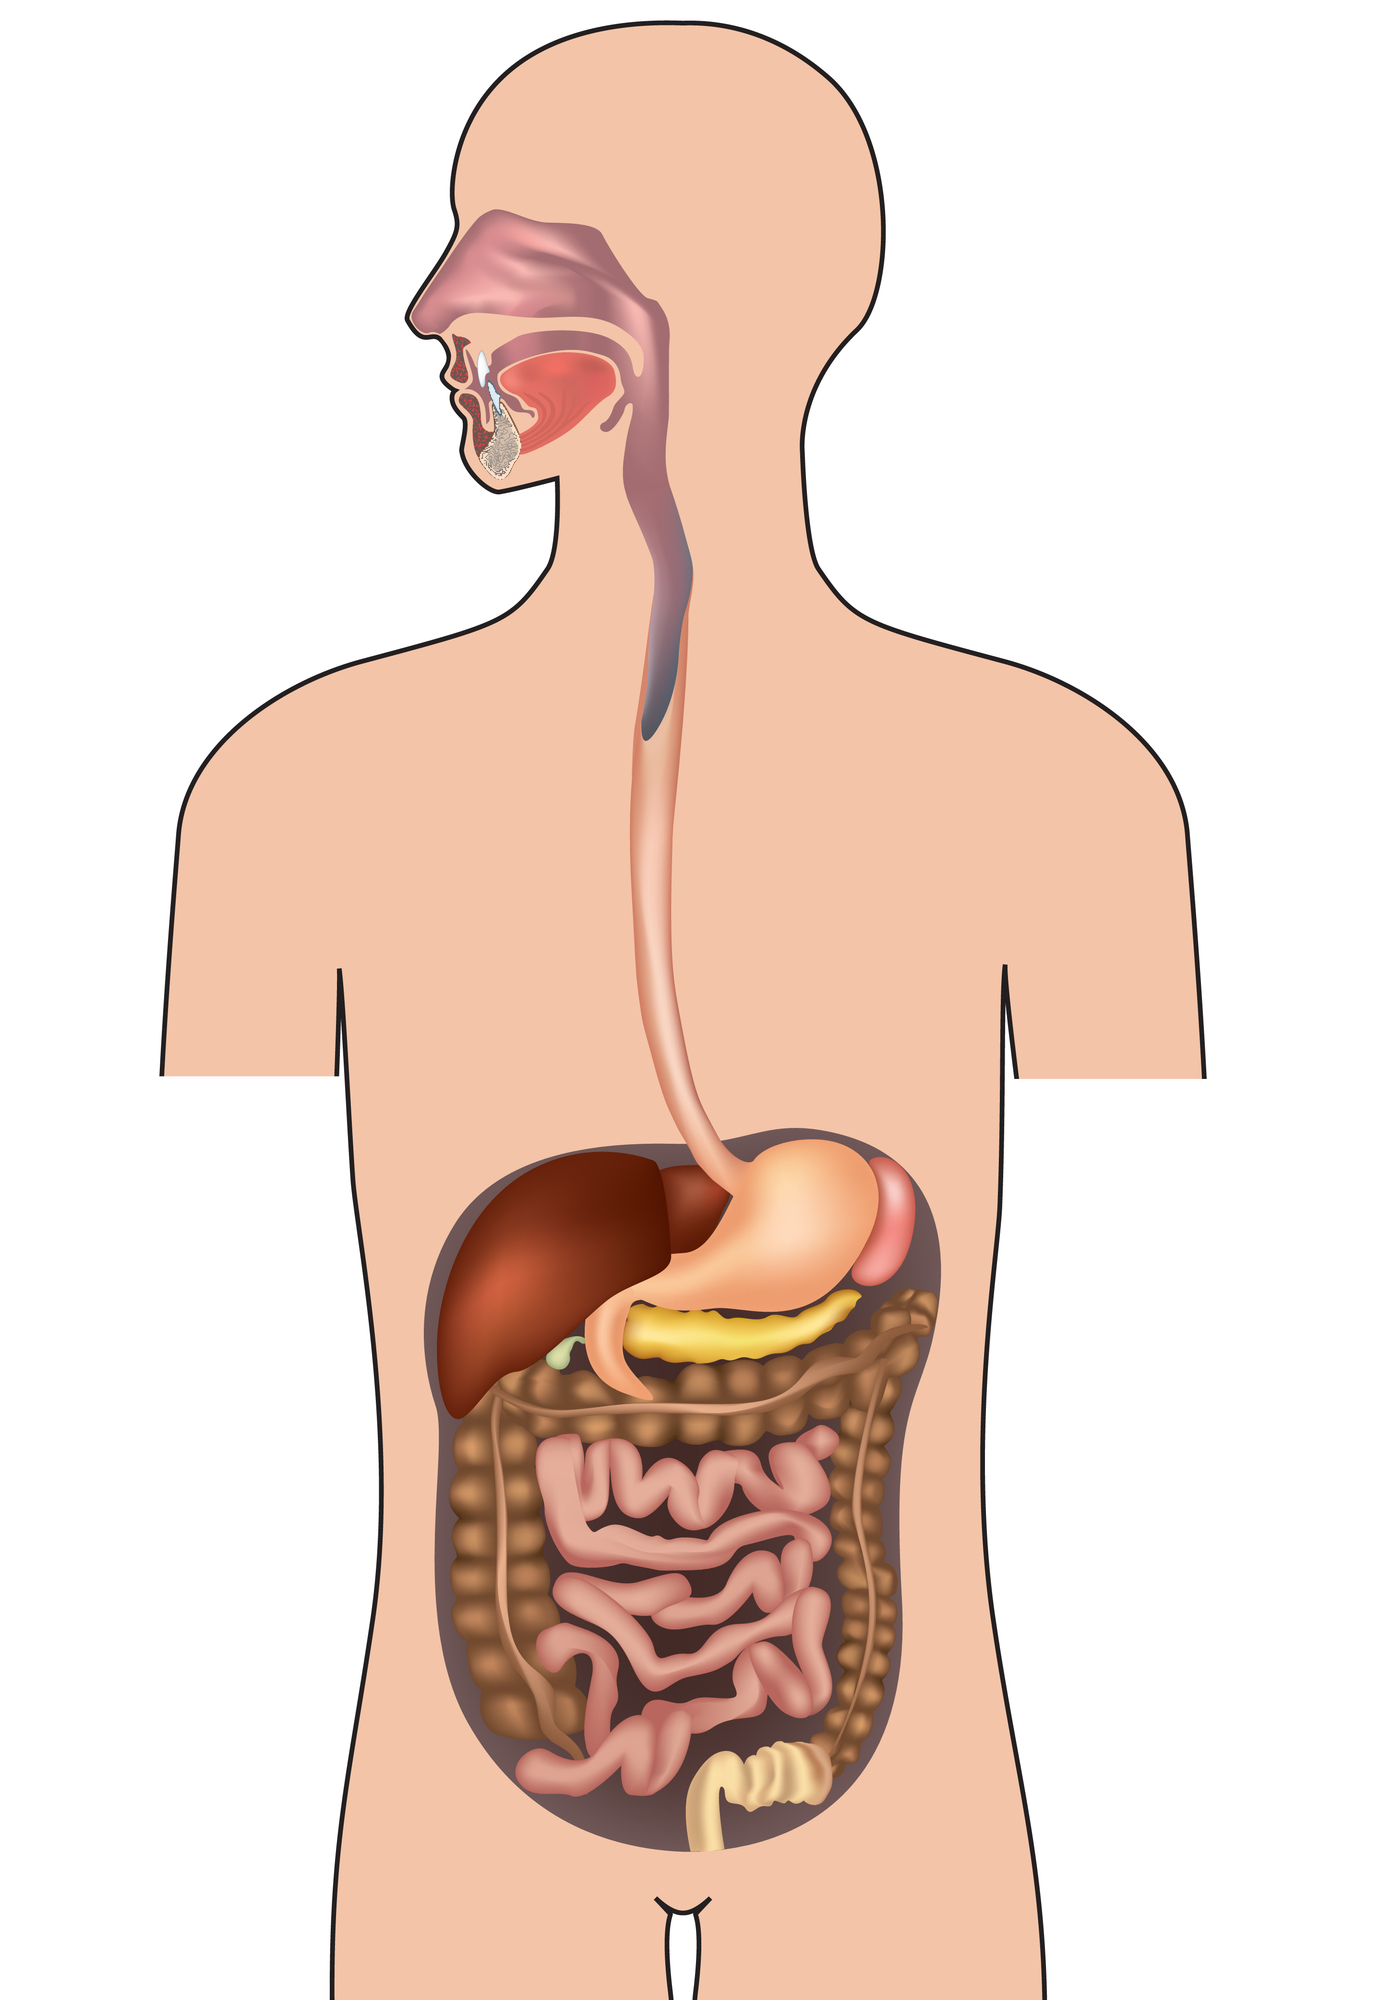 Gut Health Starts in the Digestive System.